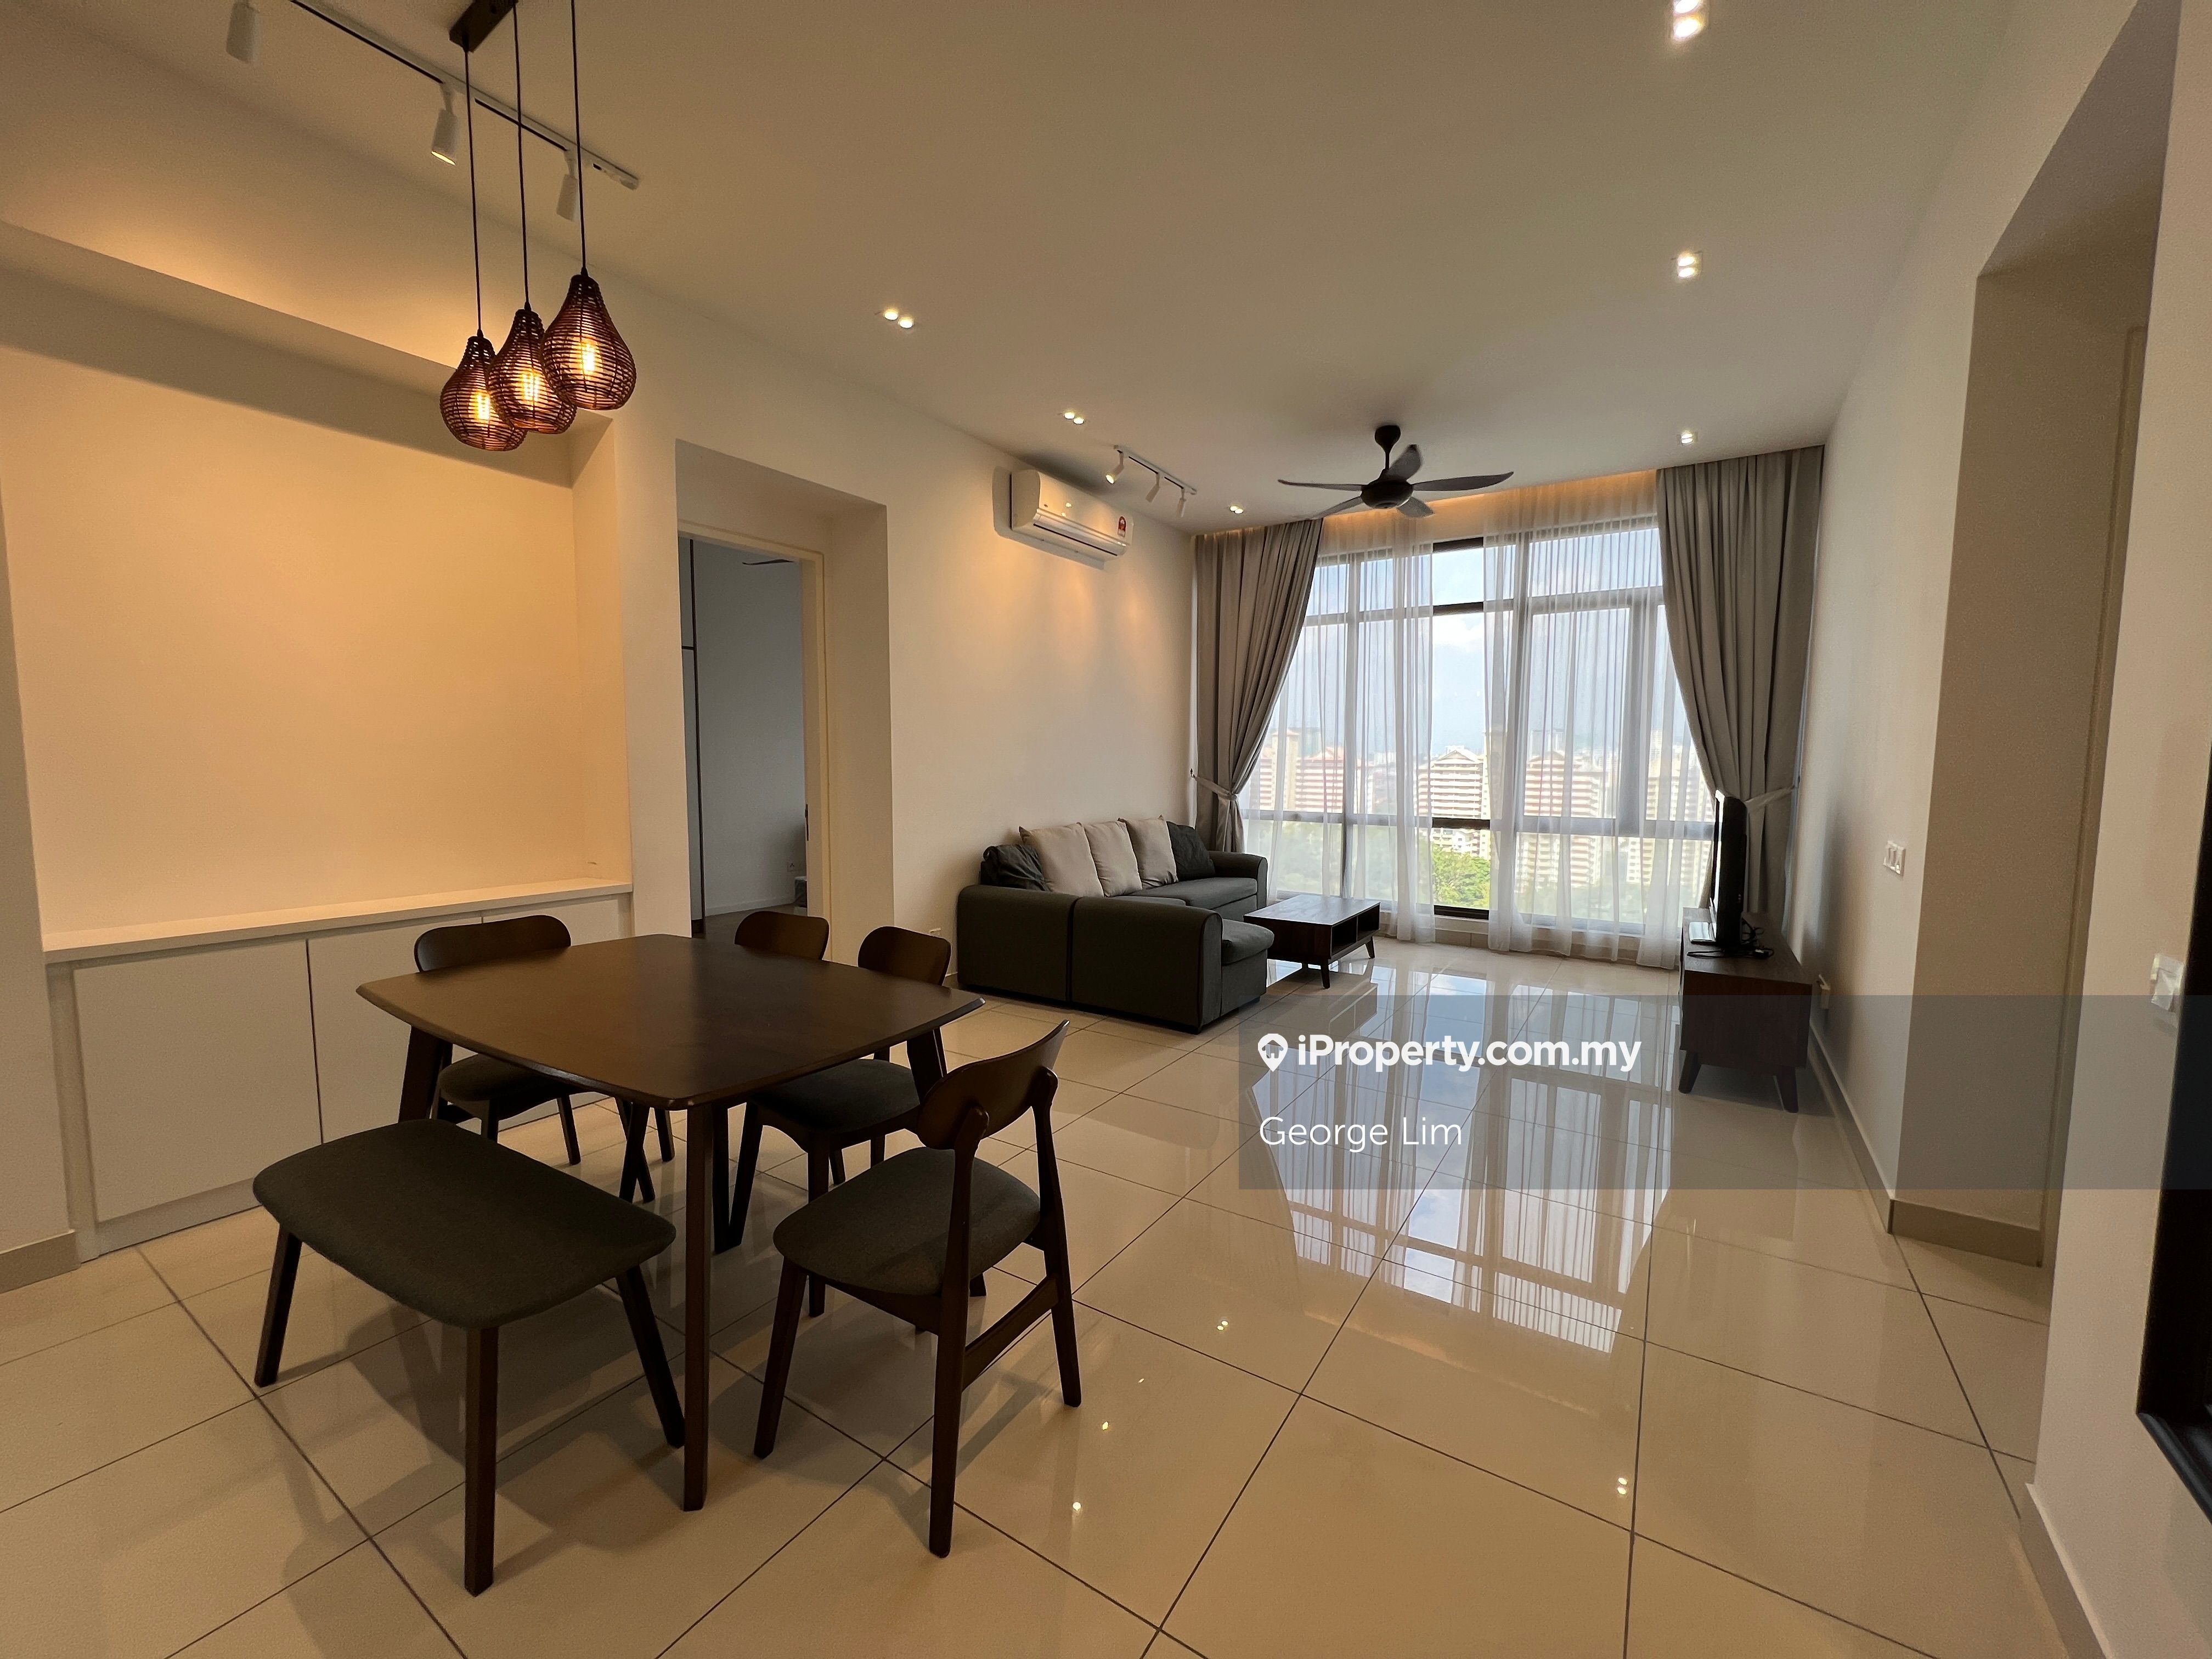 The Park Sky Residence Serviced Residence 3 bedrooms for rent in Bukit